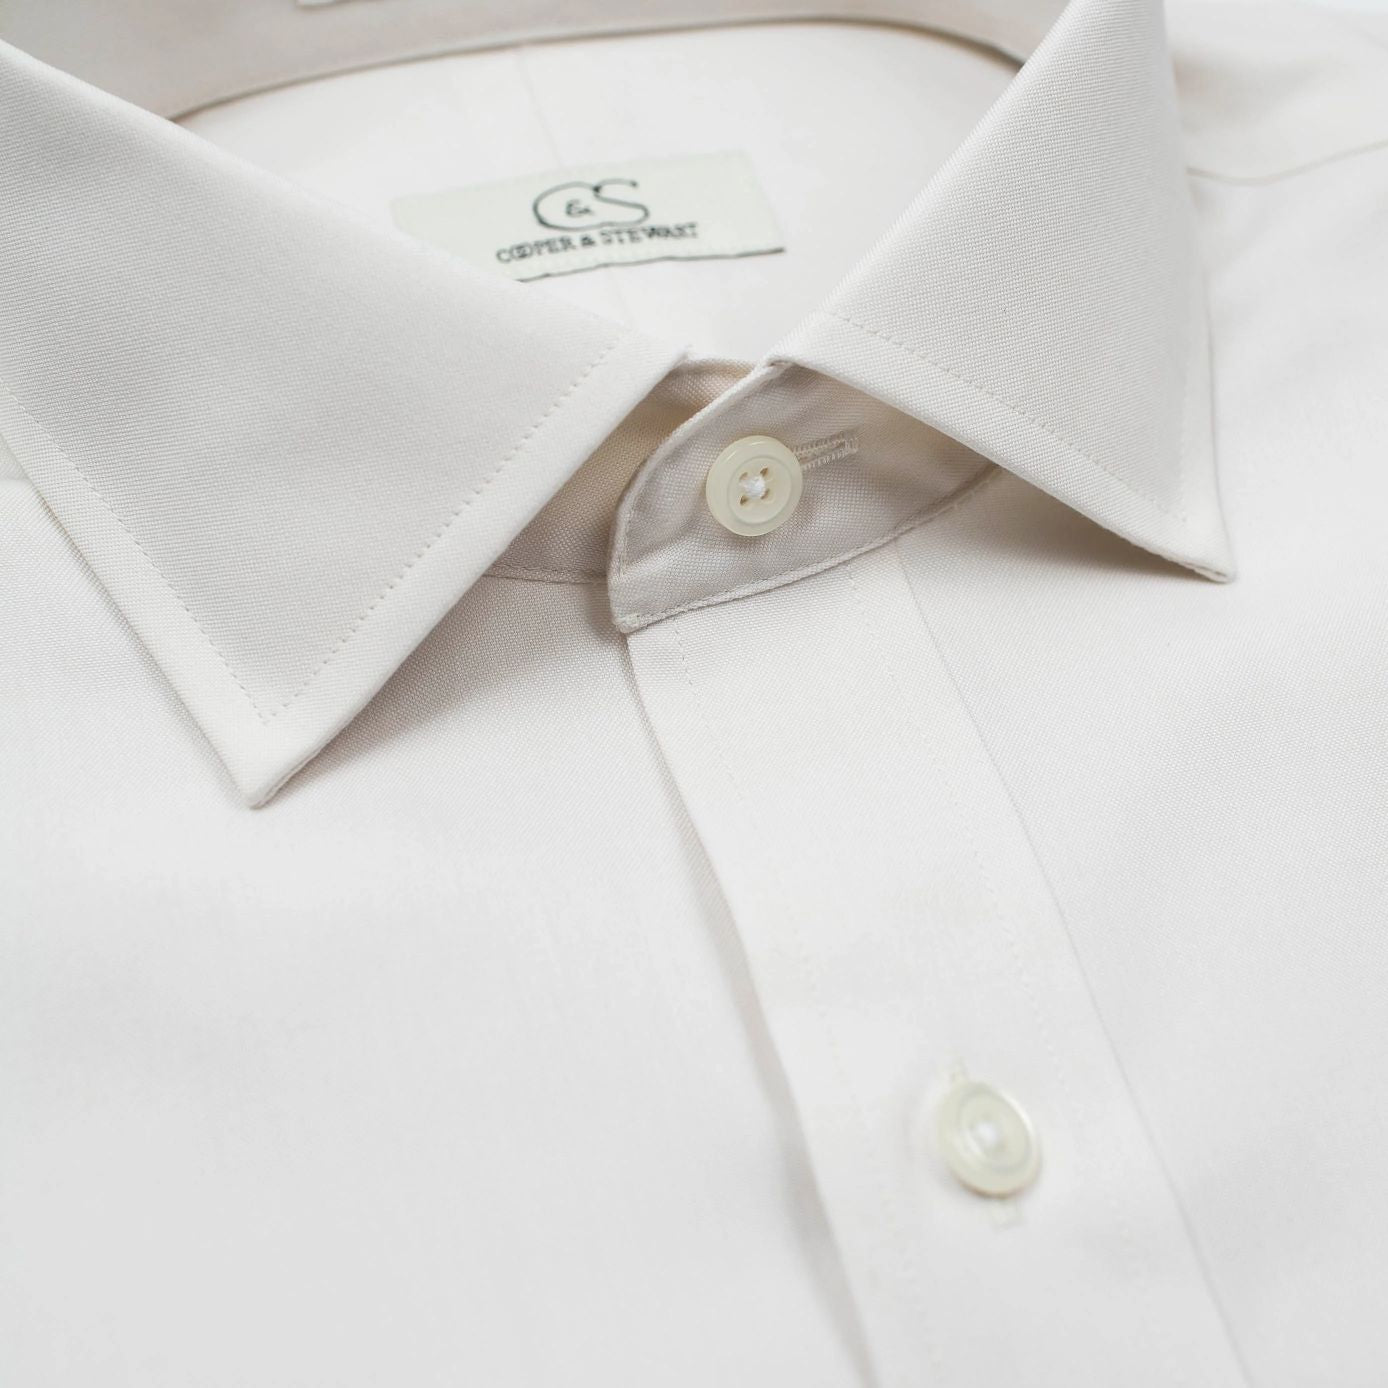 The Classic Sandstone - Wrinkle-Free Pinpoint Oxford Cotton Dress Shirt by Cooper & Stewart